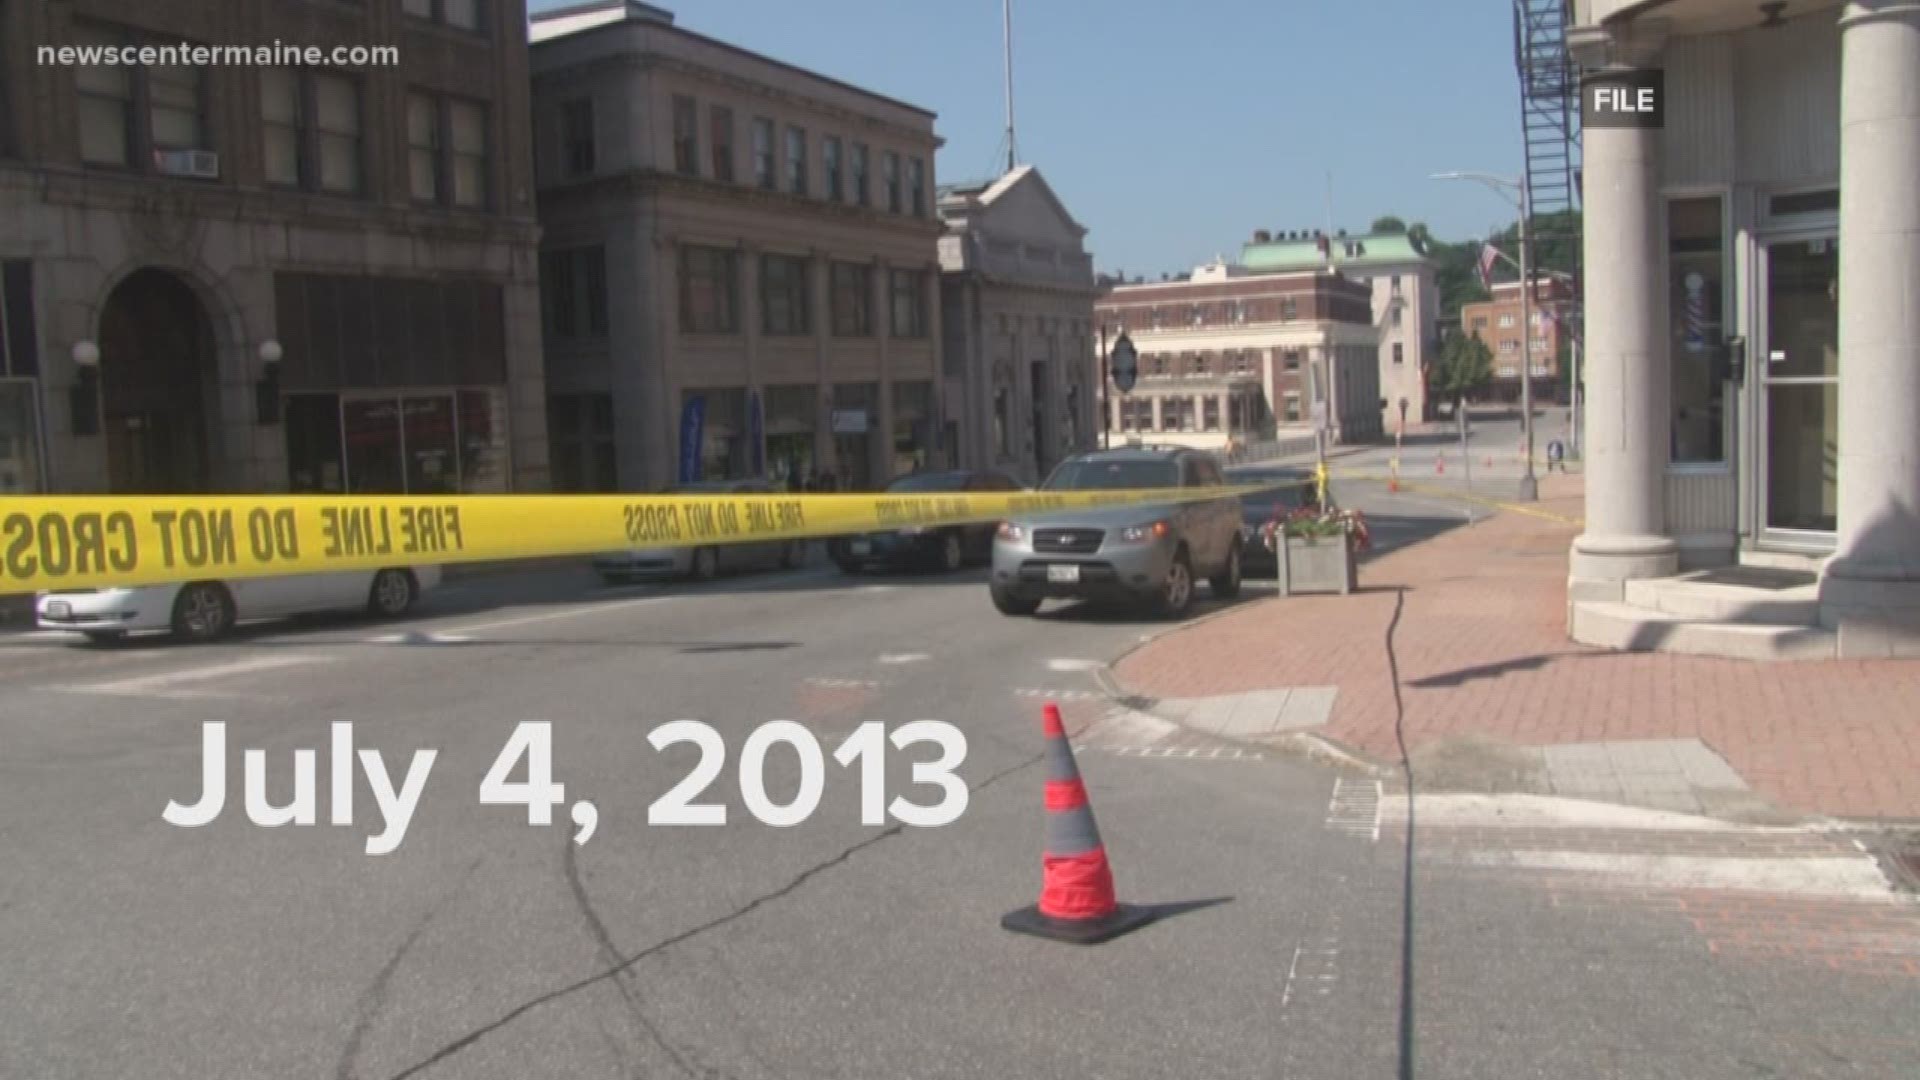 NOW: Five years after Bangor's deadly parade, standoff